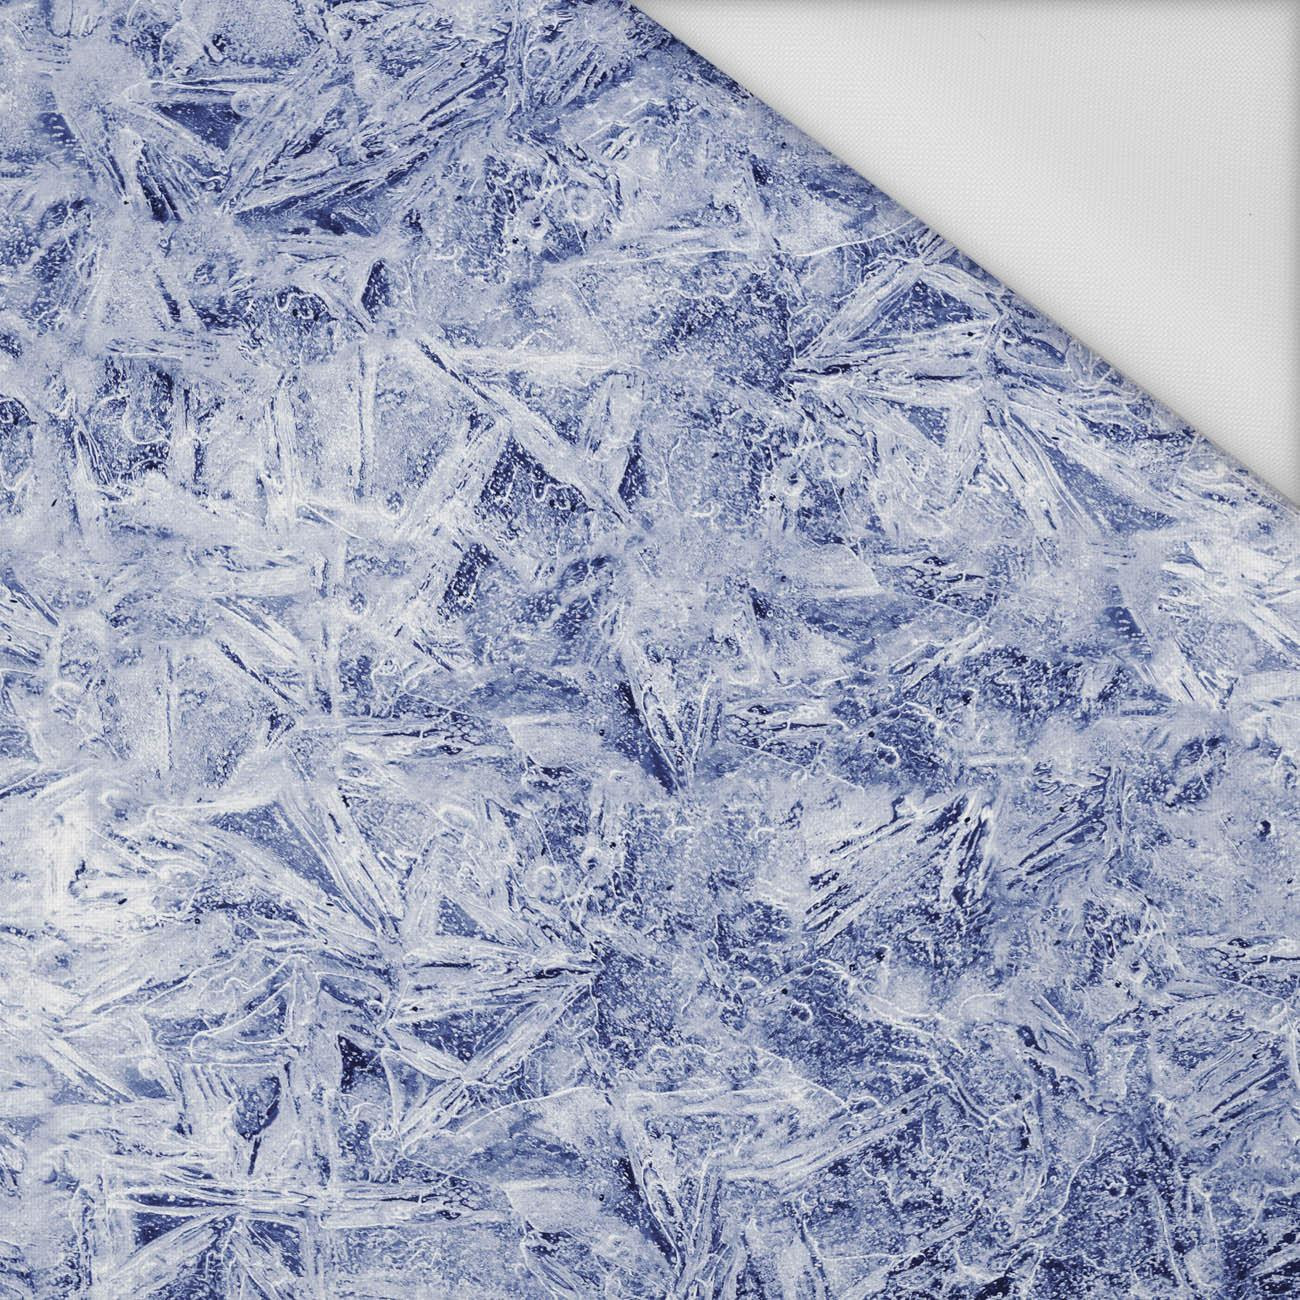 FROST pat. 2 / blue (PAINTED ON GLASS) - Waterproof woven fabric